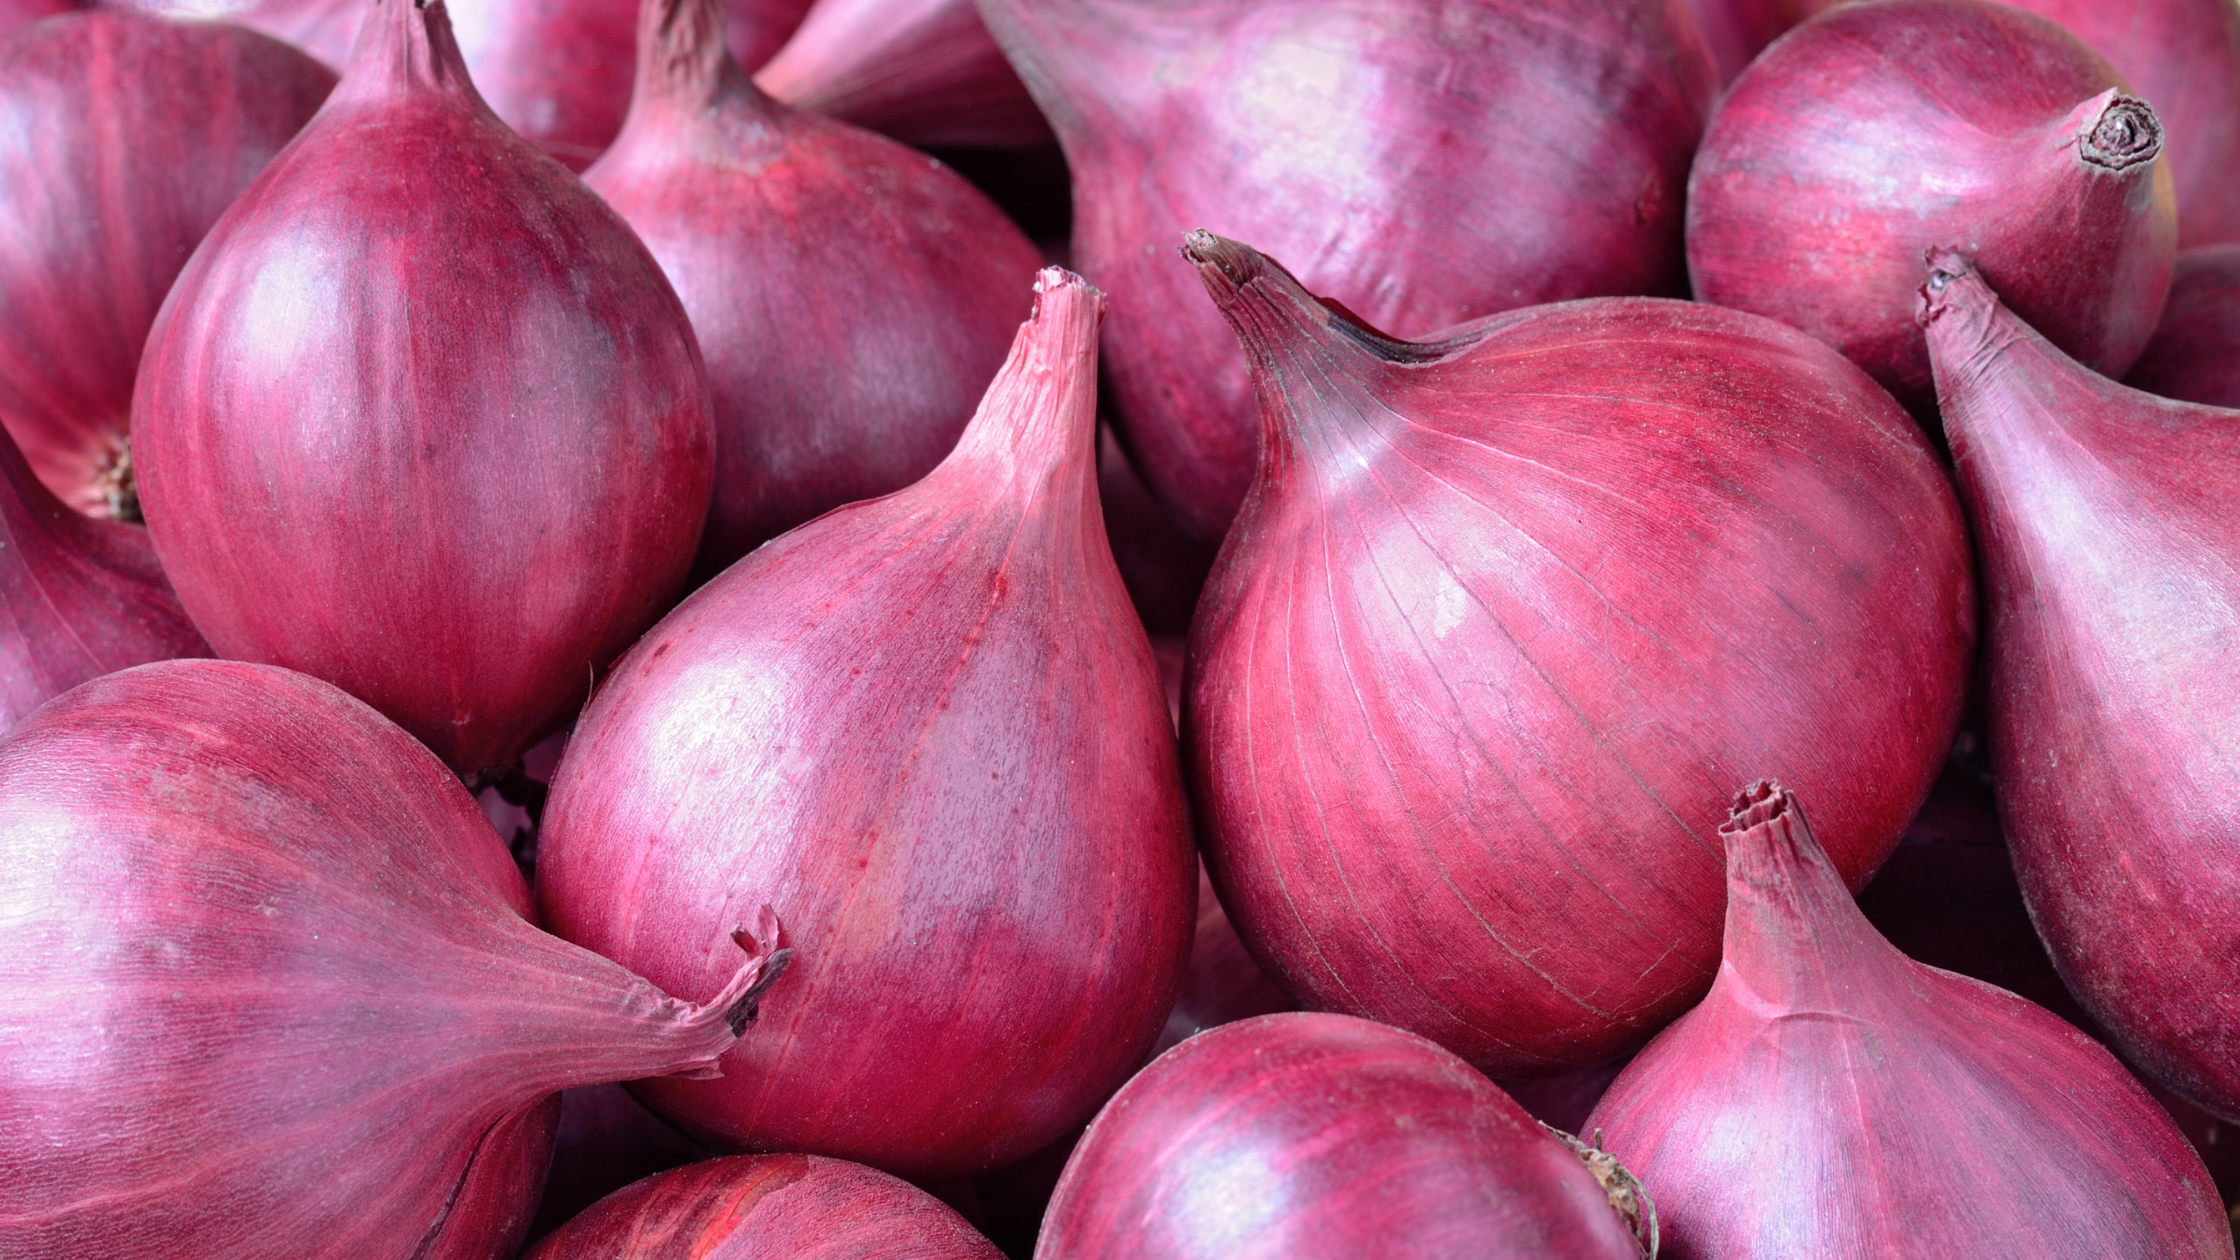 Types Of Onions